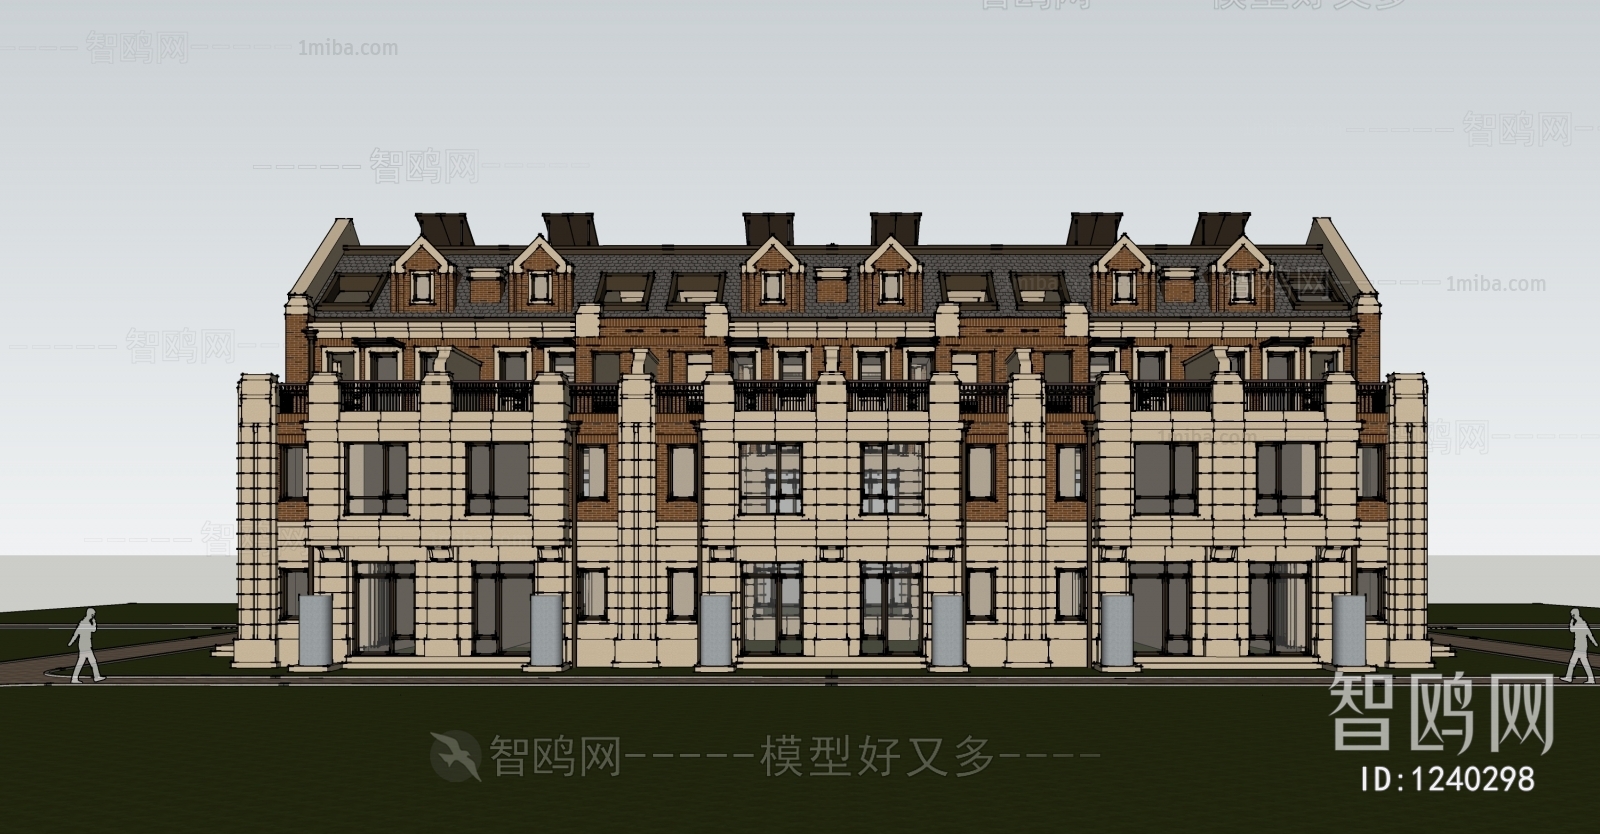 Classical Style Building Appearance